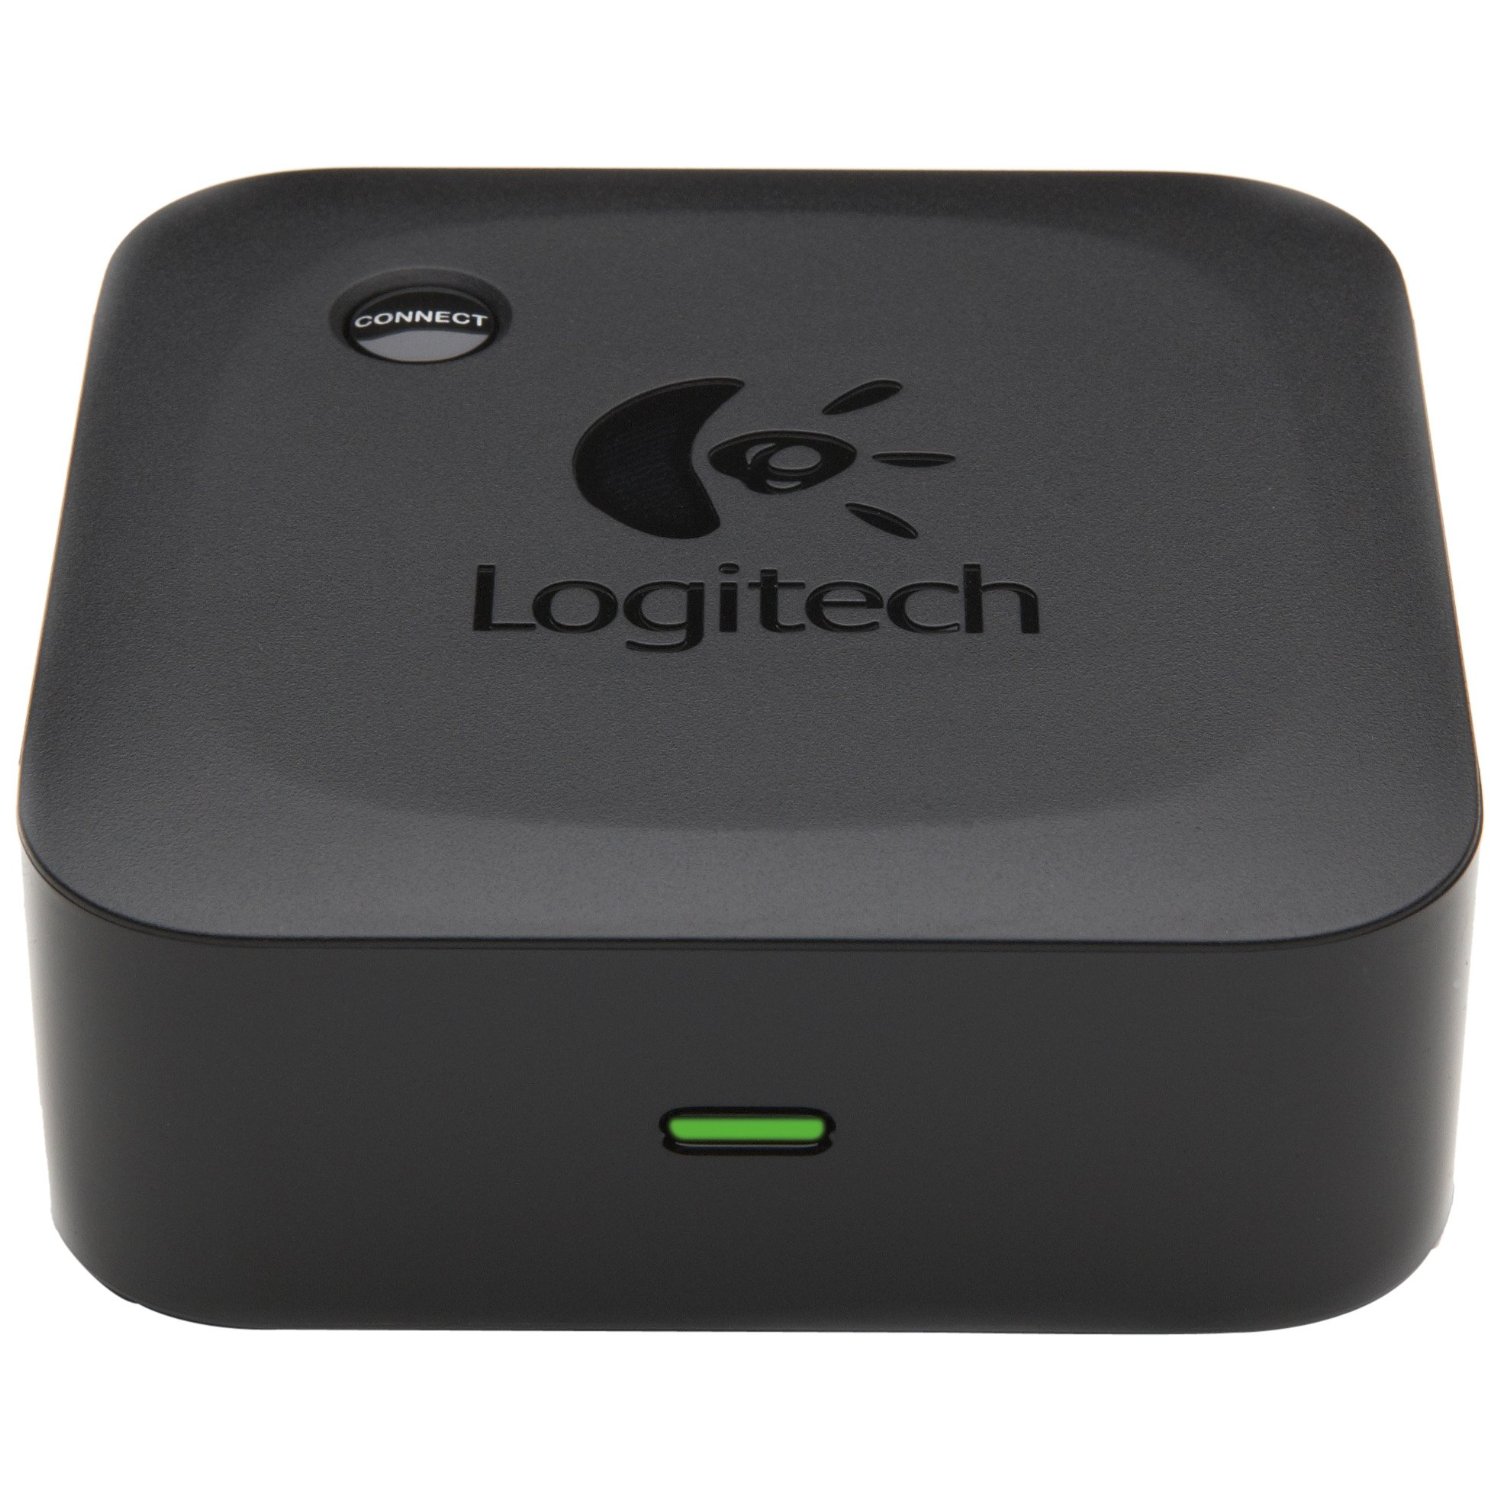 http://thetechjournal.com/wp-content/uploads/images/1110/1318856524-logitech-wireless-speaker-adapter-for-bluetooth-audio-devices-1.jpg